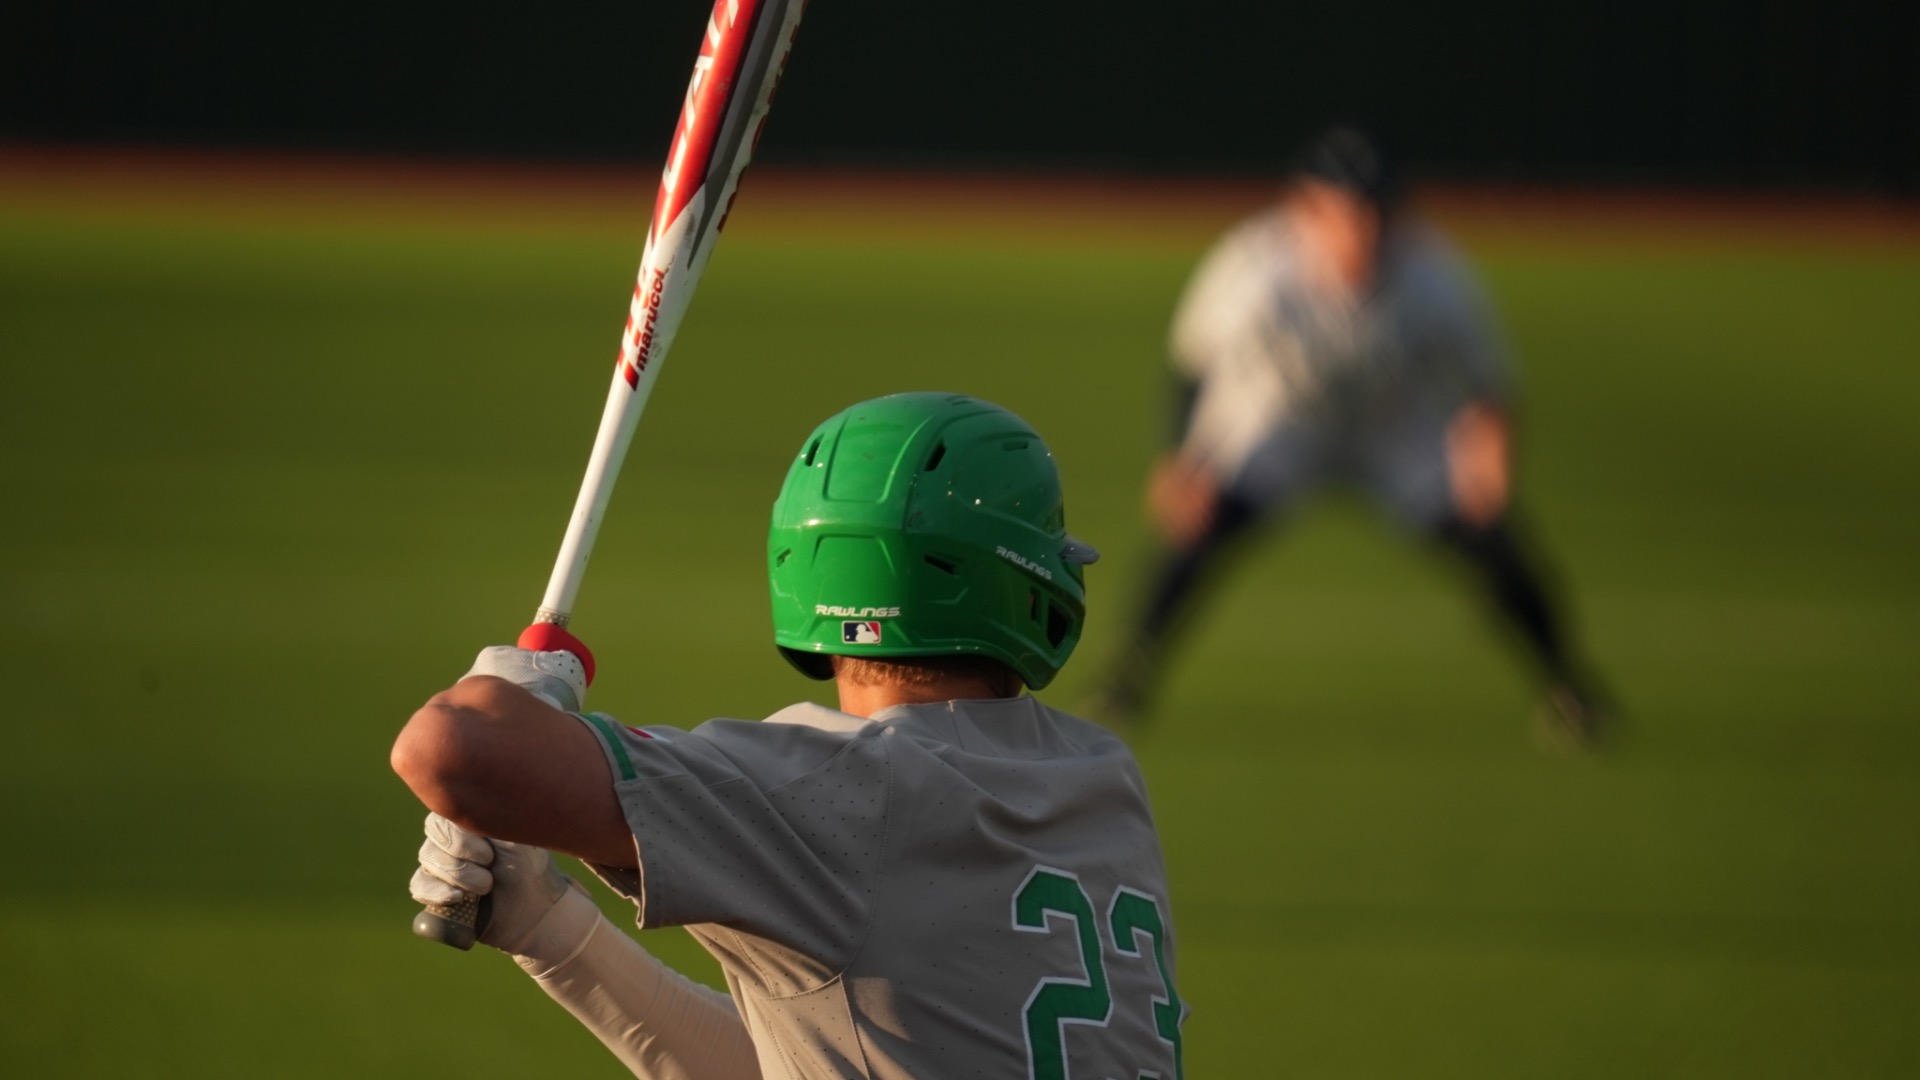 Slide 6 - Dragons vs. Blue Raiders tonight in game 1 of UIL Baseball Playoffs - Click here for tickets